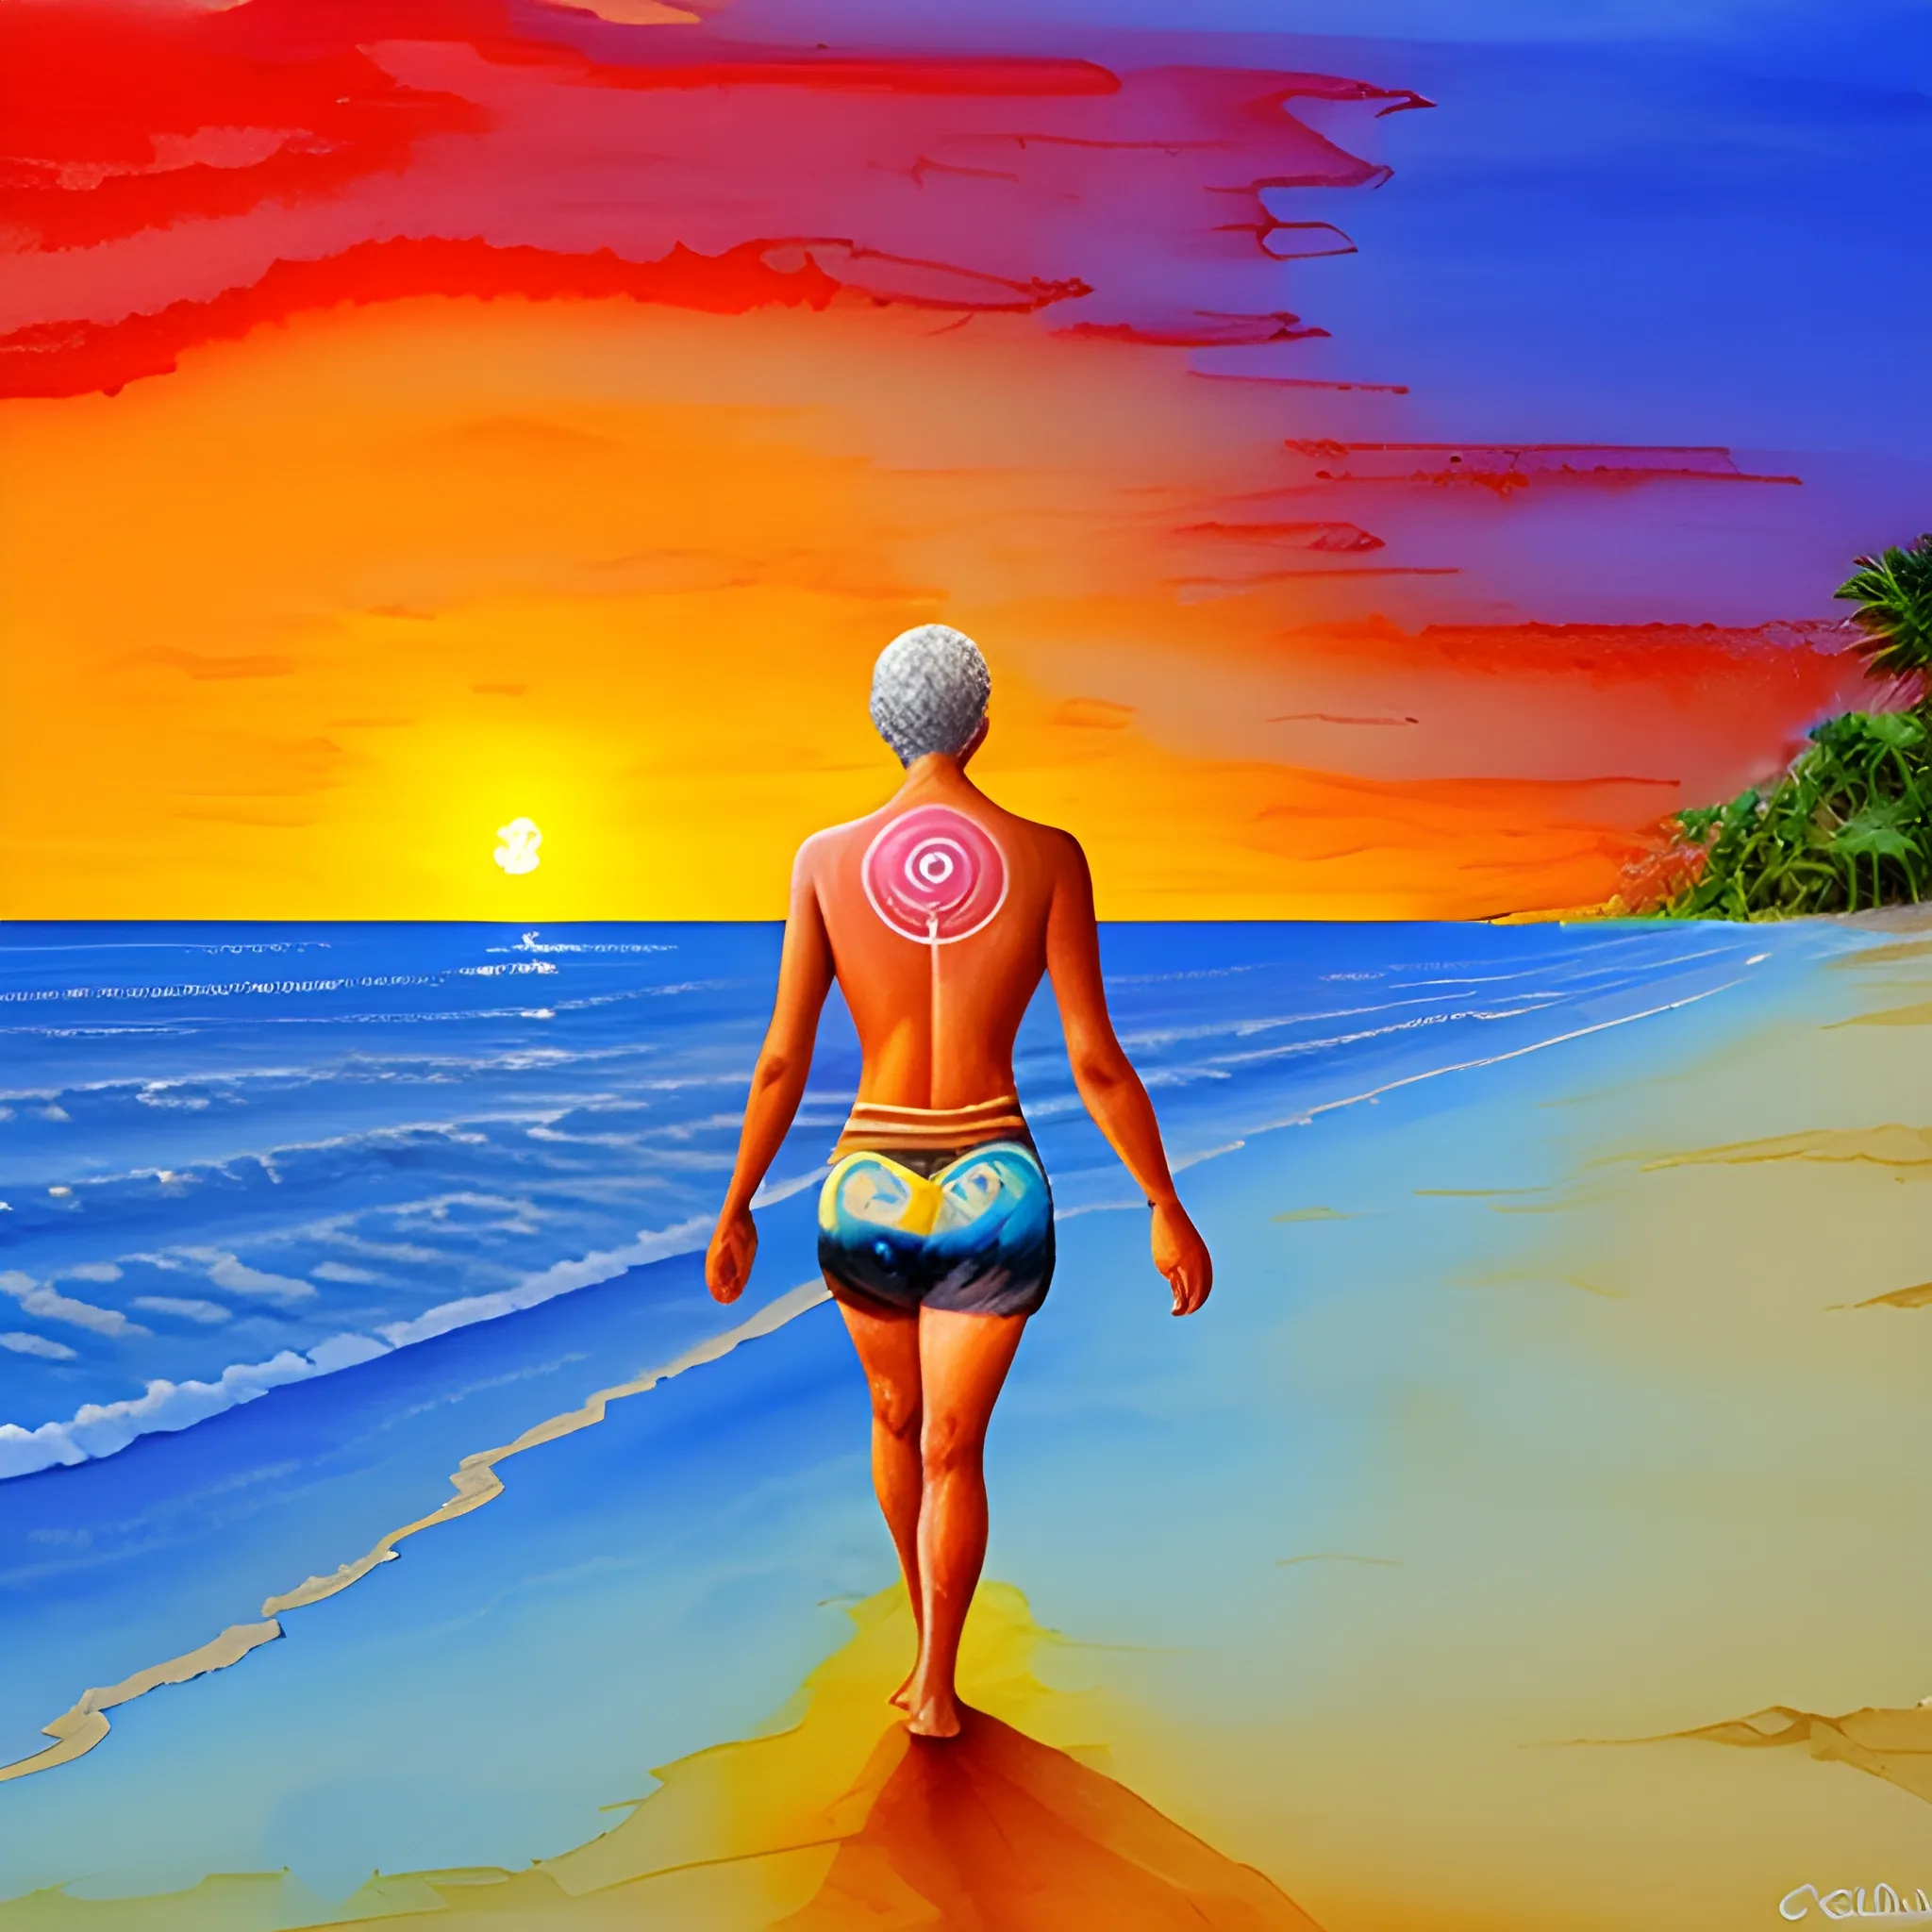 
man with the seven chakras on his back, beach, sunset, universe, walking to the sea, initiation, footprints in the sand,
, Water Color, Oil Painting, Cartoon, Trippy